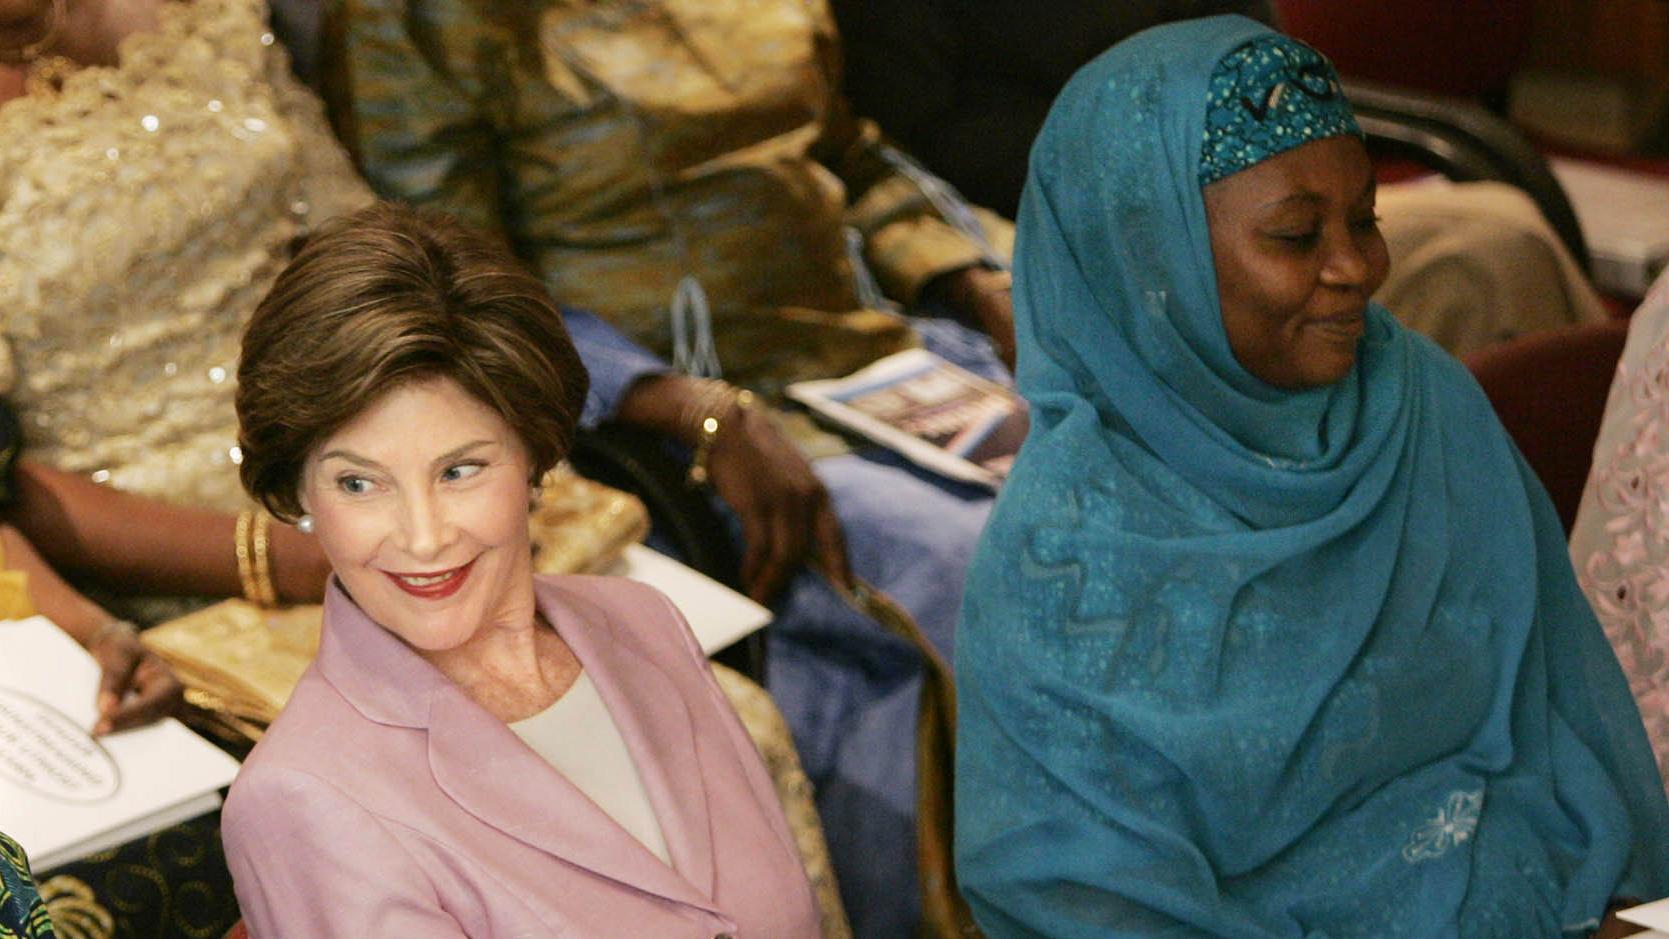 Hajia Bilkisu Yusuf sits with former first lady, Laura Bush, at the National Center for Women's Development in Abuja, Nigeria, January 2006.